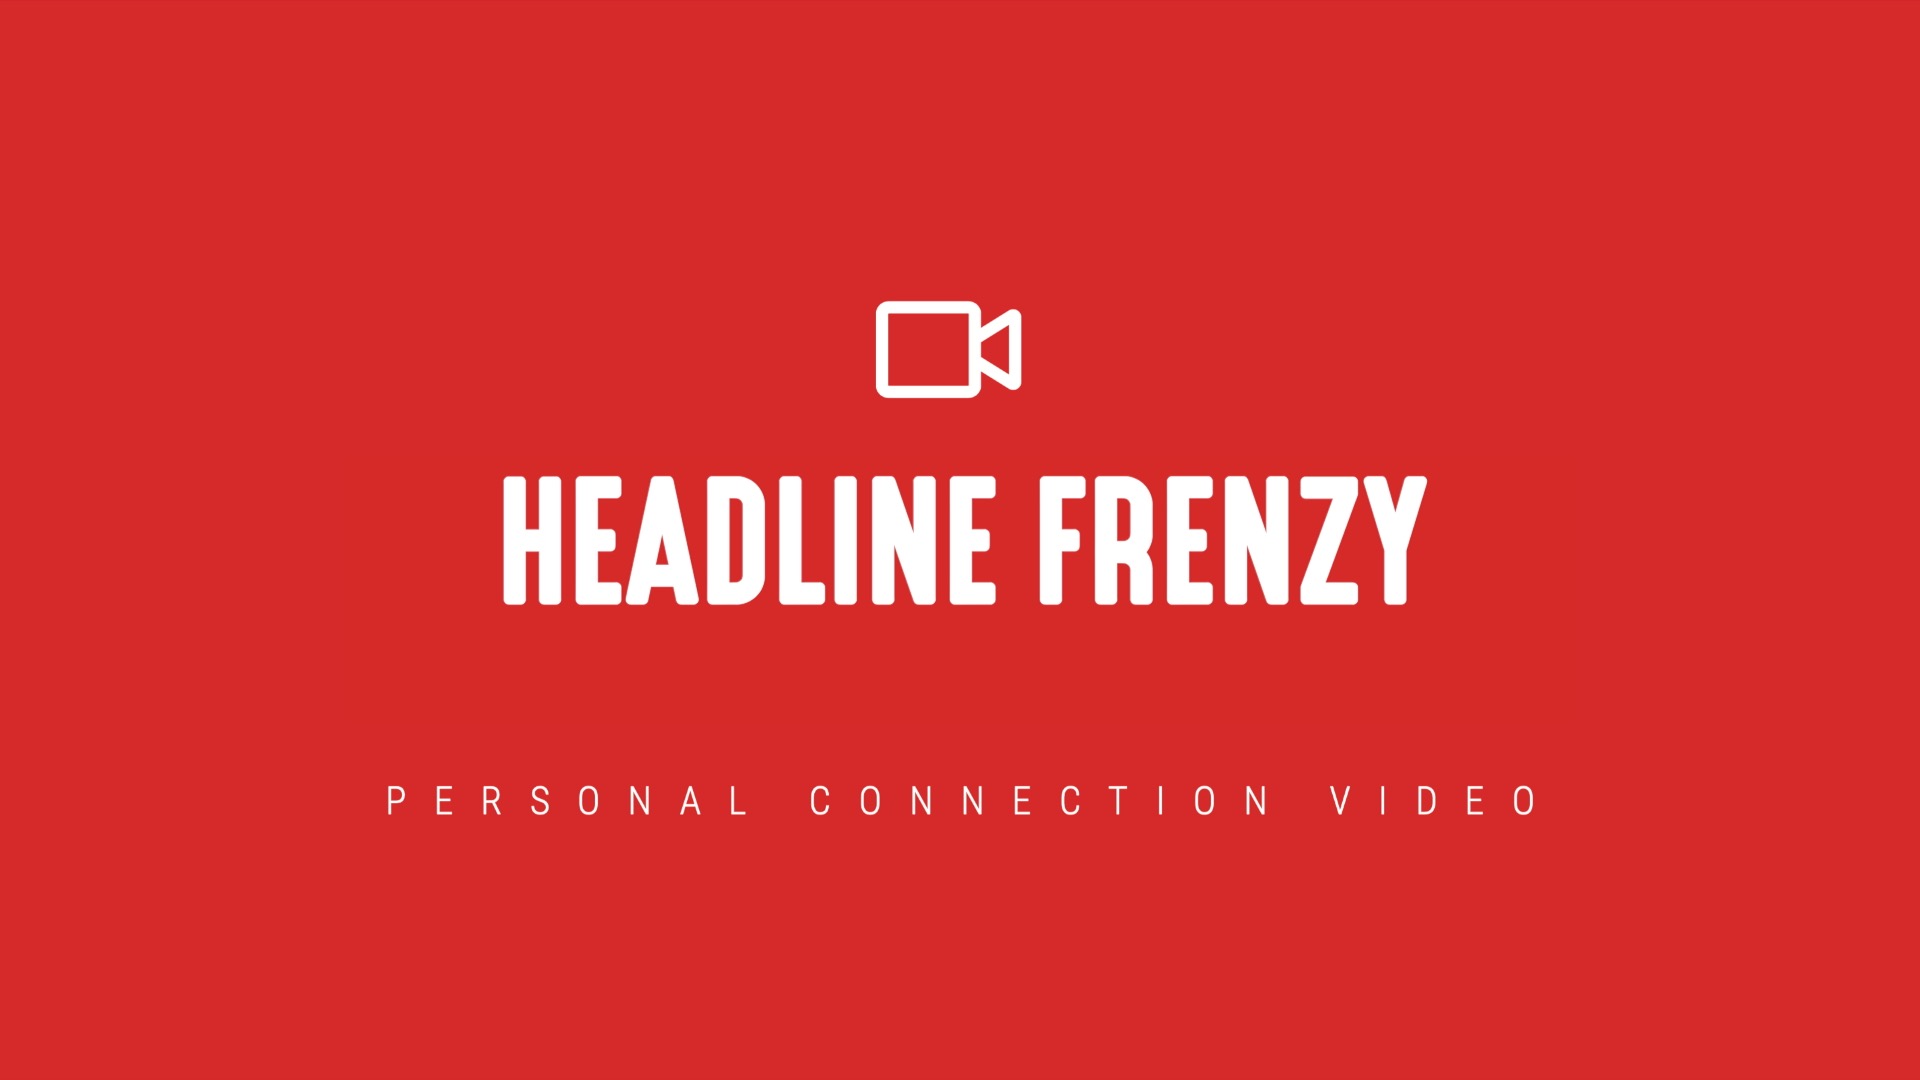 [NEW] Personal Connection Videos | Headline Frenzy